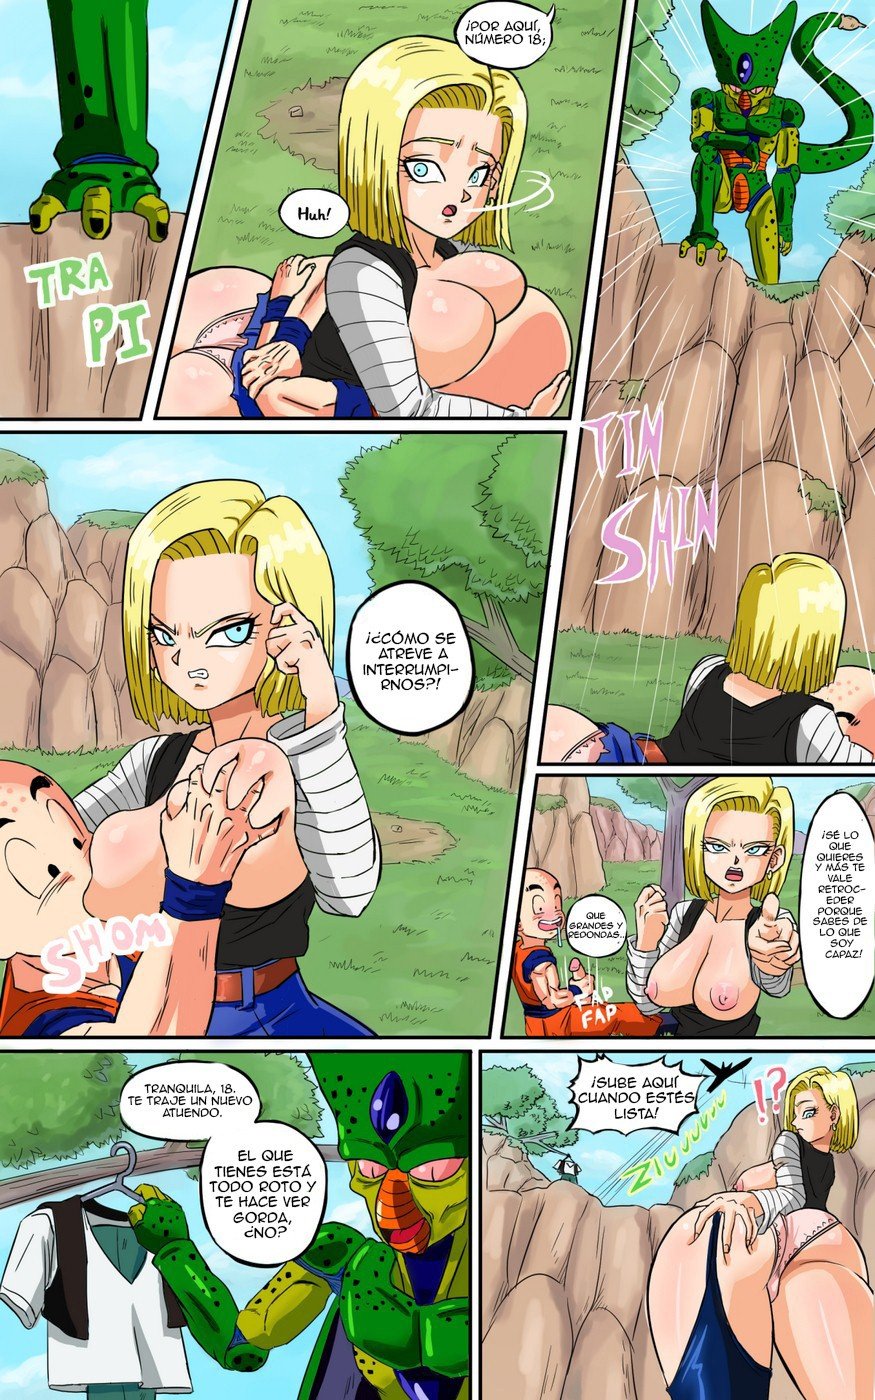 Android 18 meets Krillin - 4